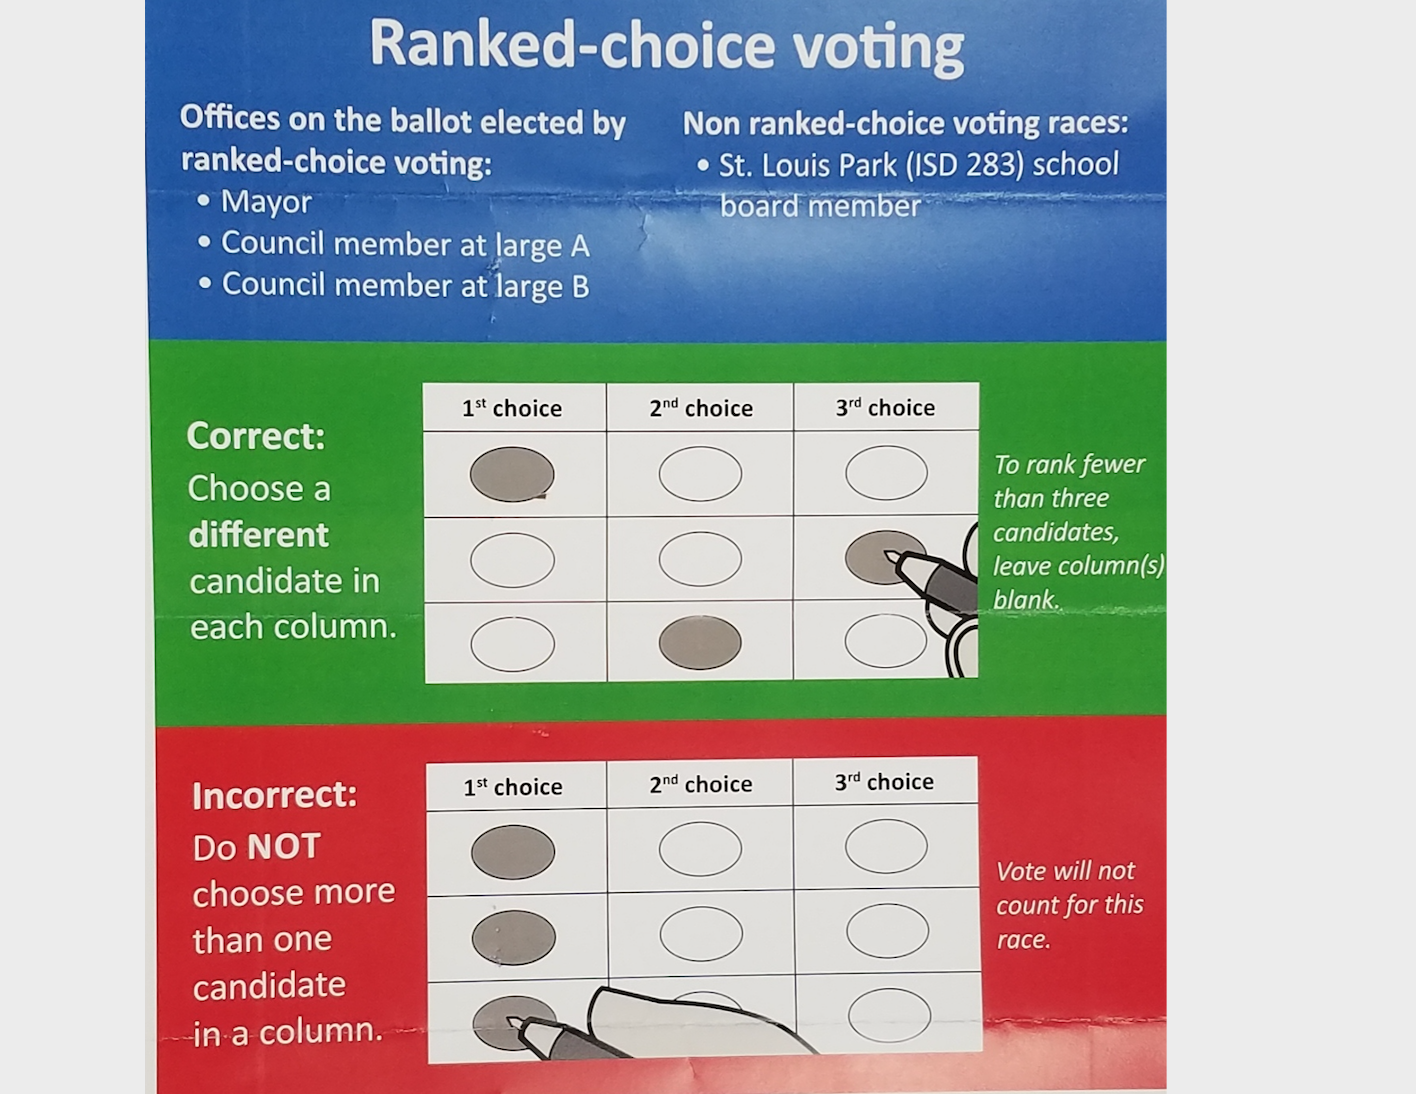 Ranked choice voting - lists offices with RCV and non-RCV races, and shows correct and incorrect way to vote